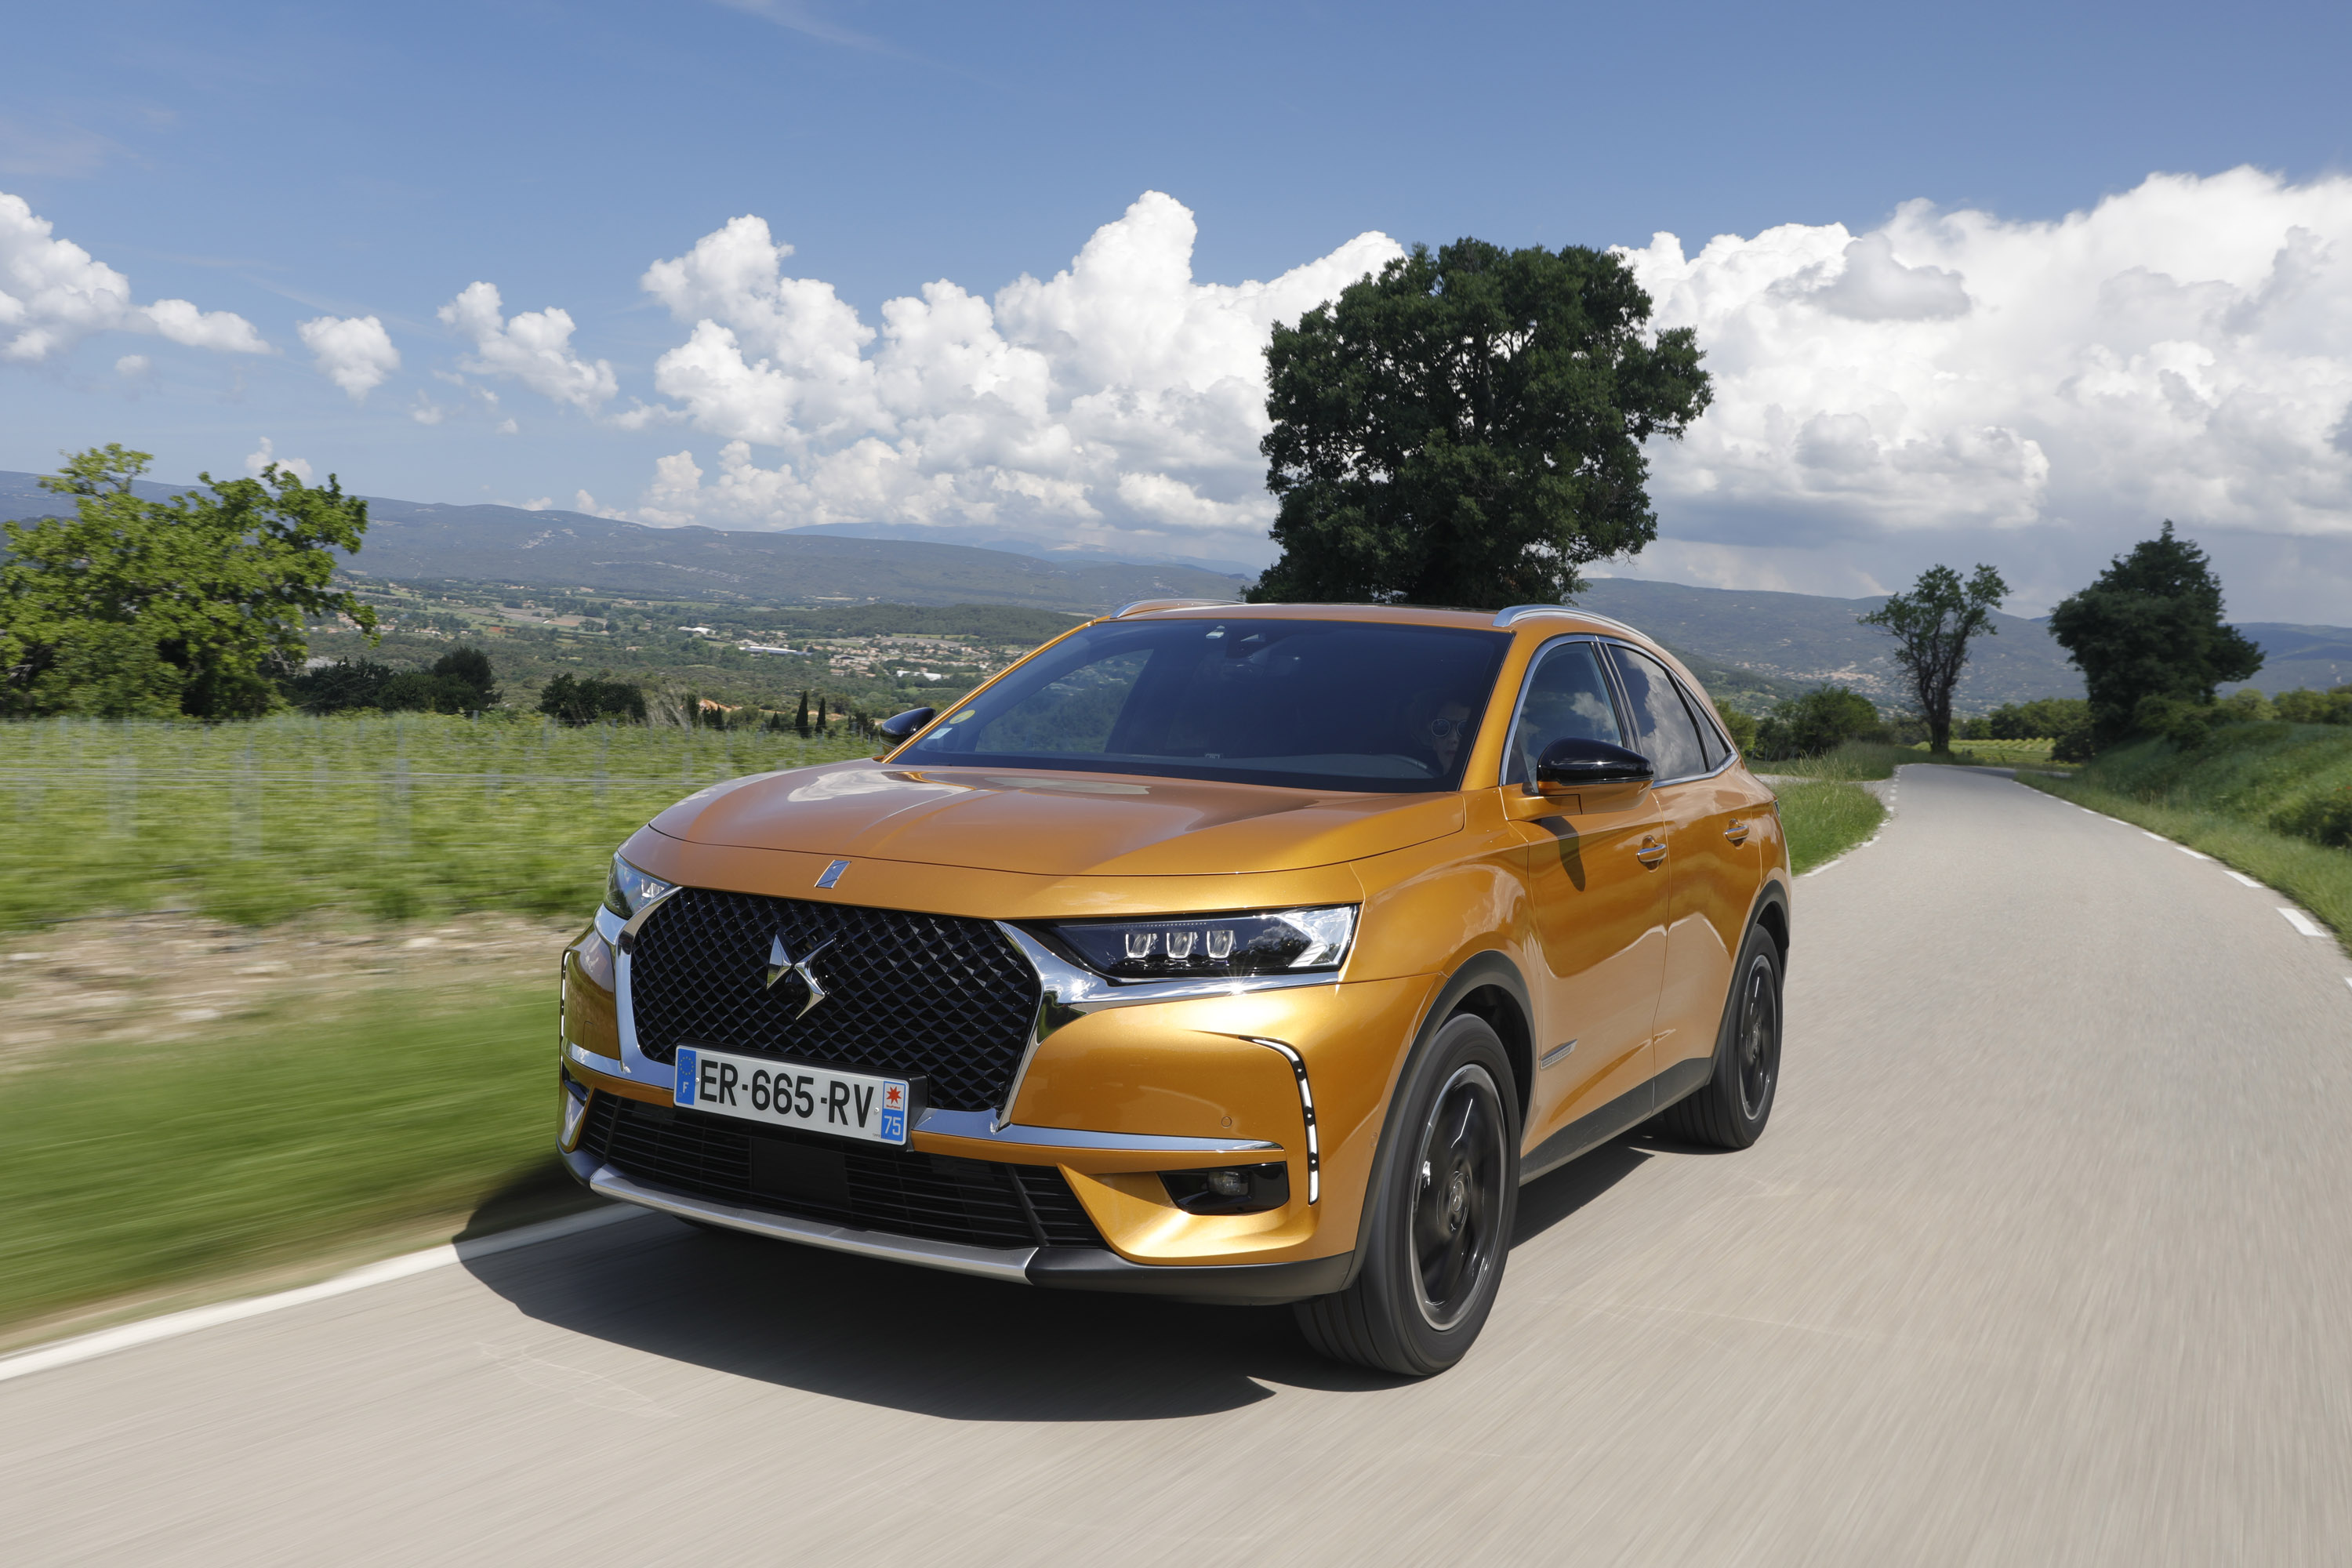 DS 7 Crossback hd specifications